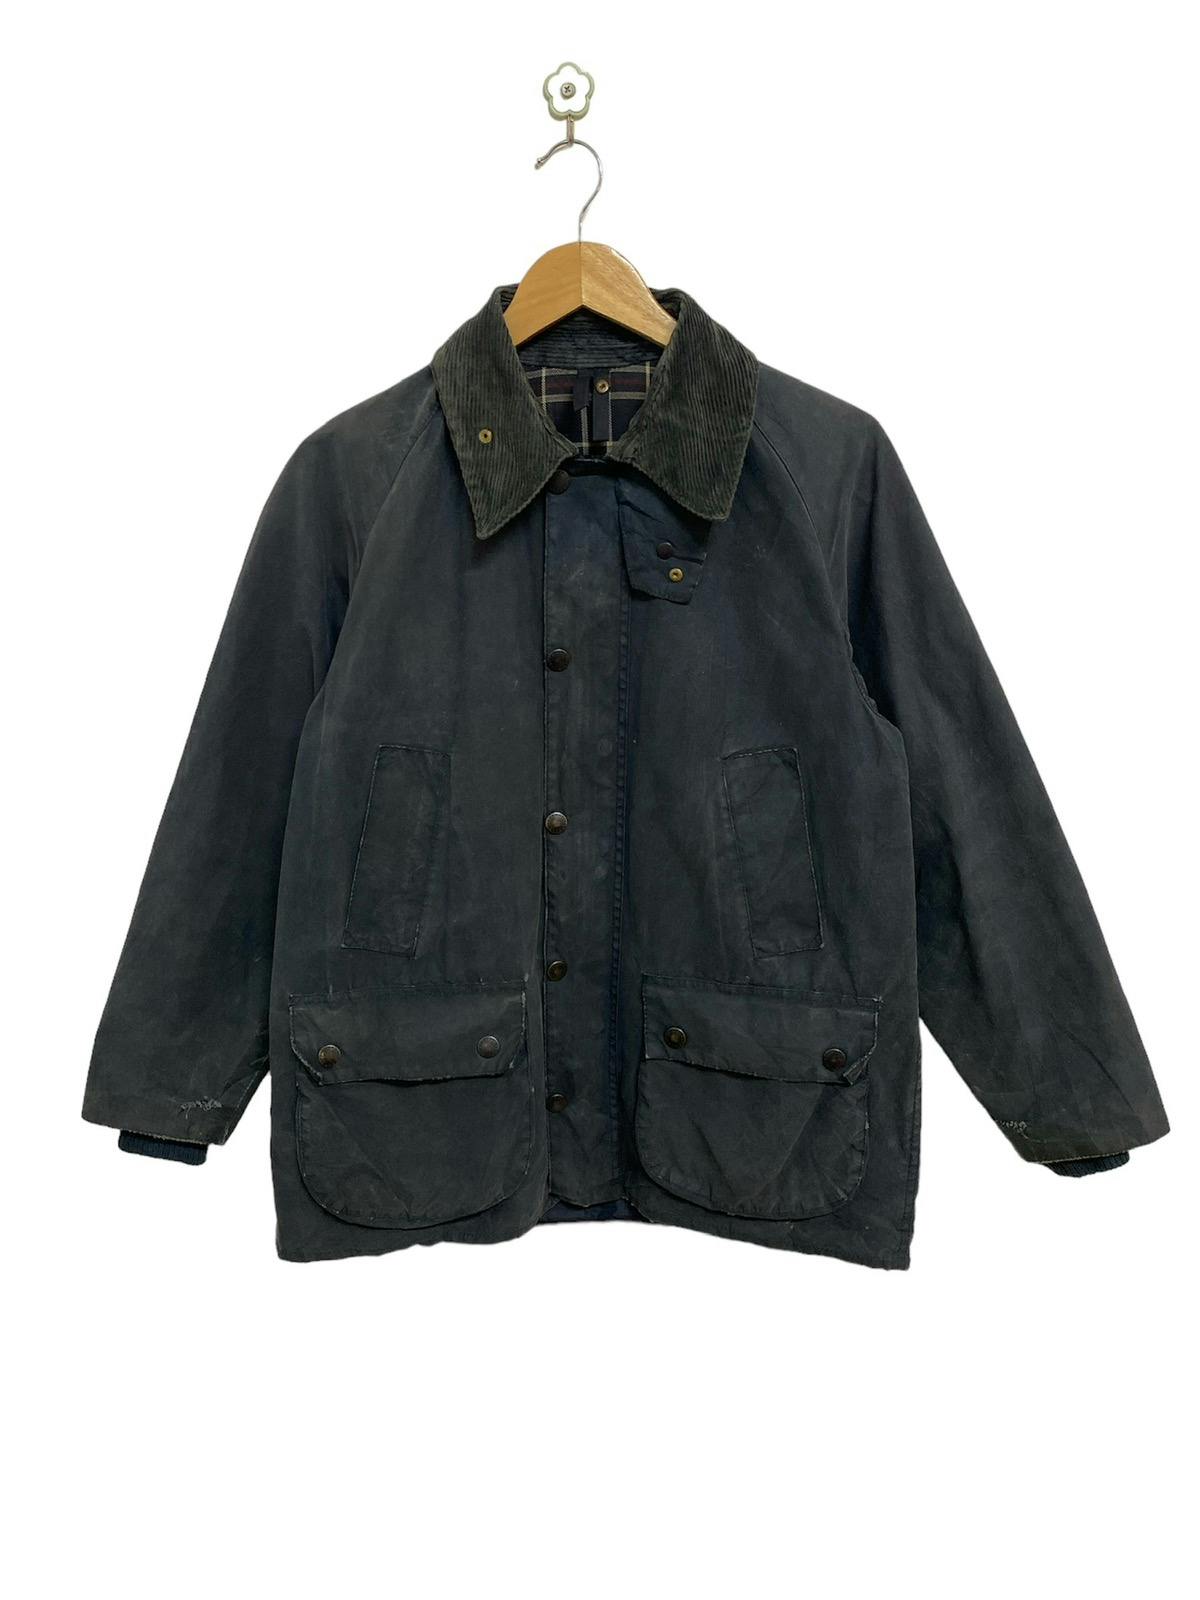 Barbour Bedale A105 Wax Jacket Made in England - 2